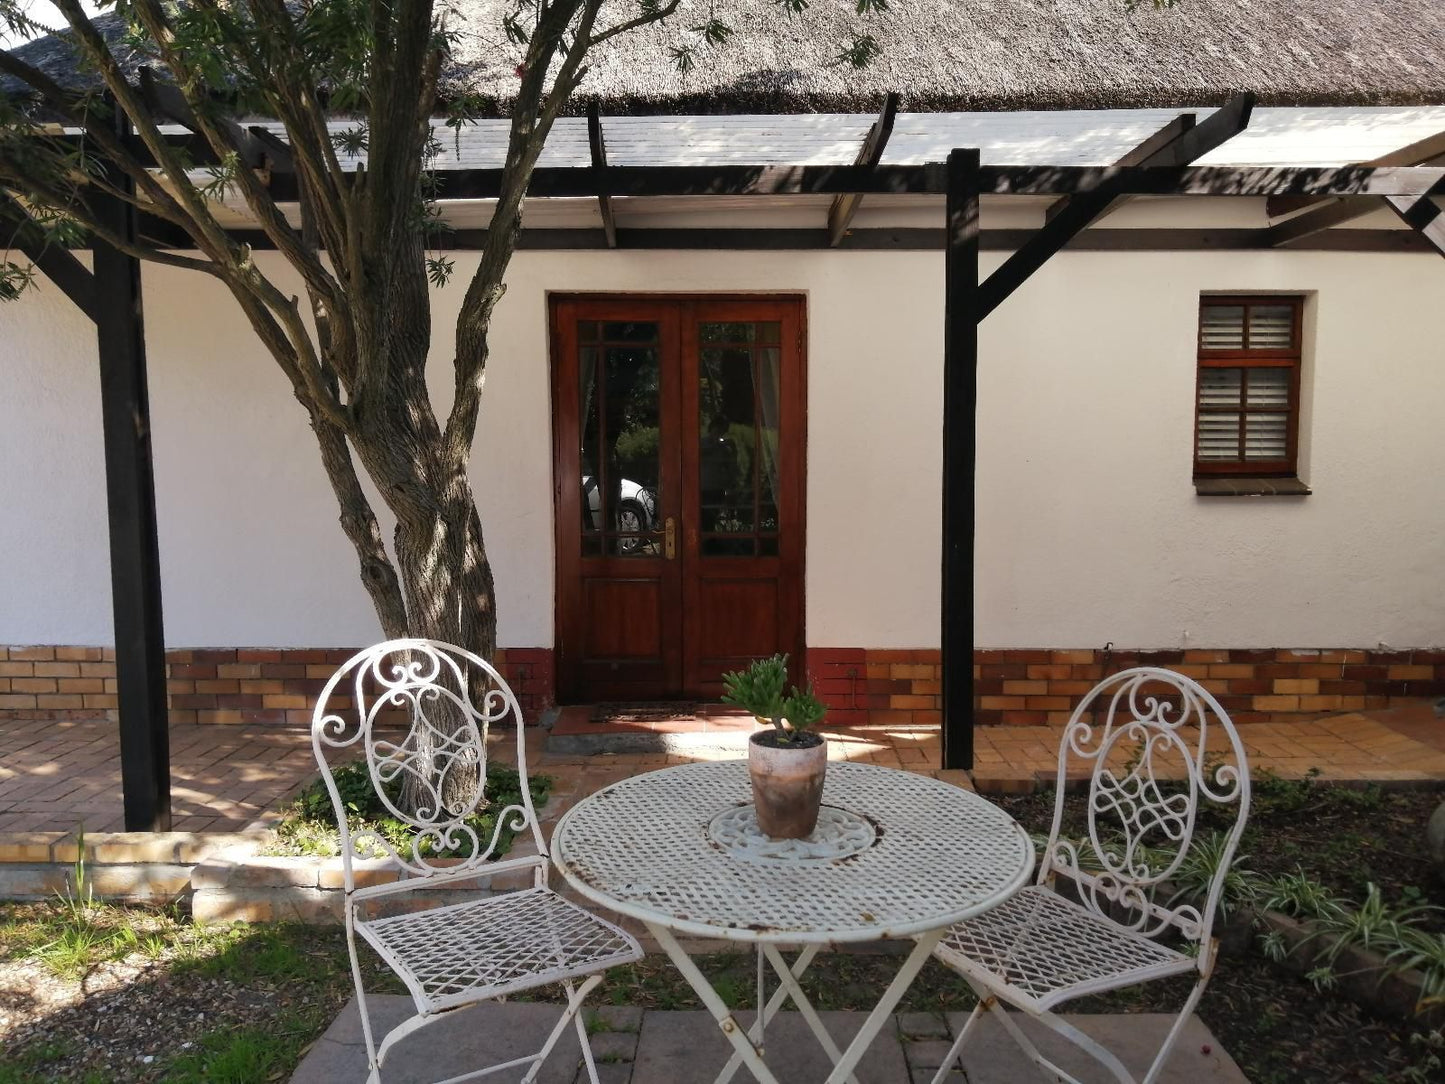 Beulah Lodge Pinelands Cape Town Western Cape South Africa House, Building, Architecture